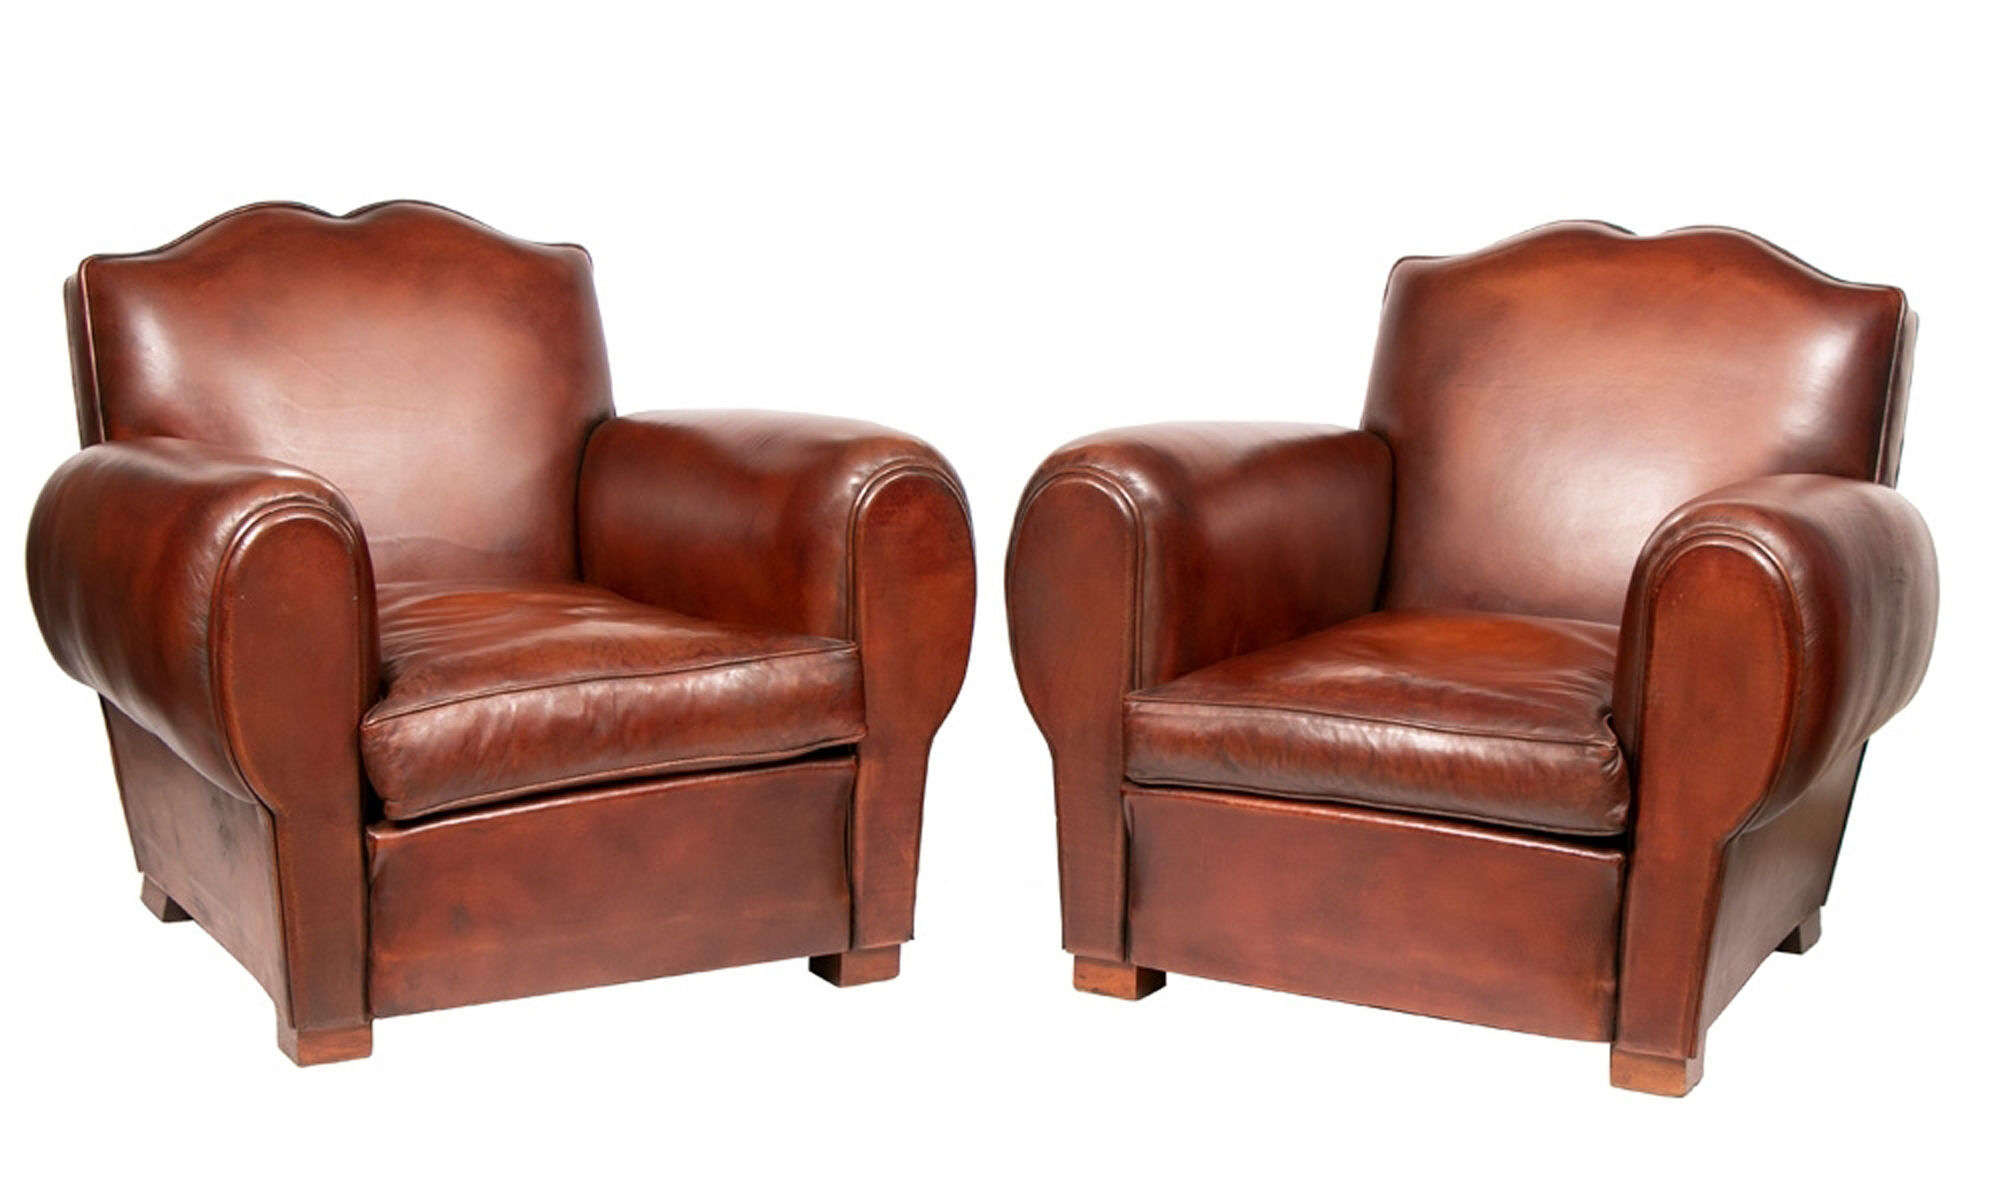 Pair of Moustache Club Chairs c.1930s